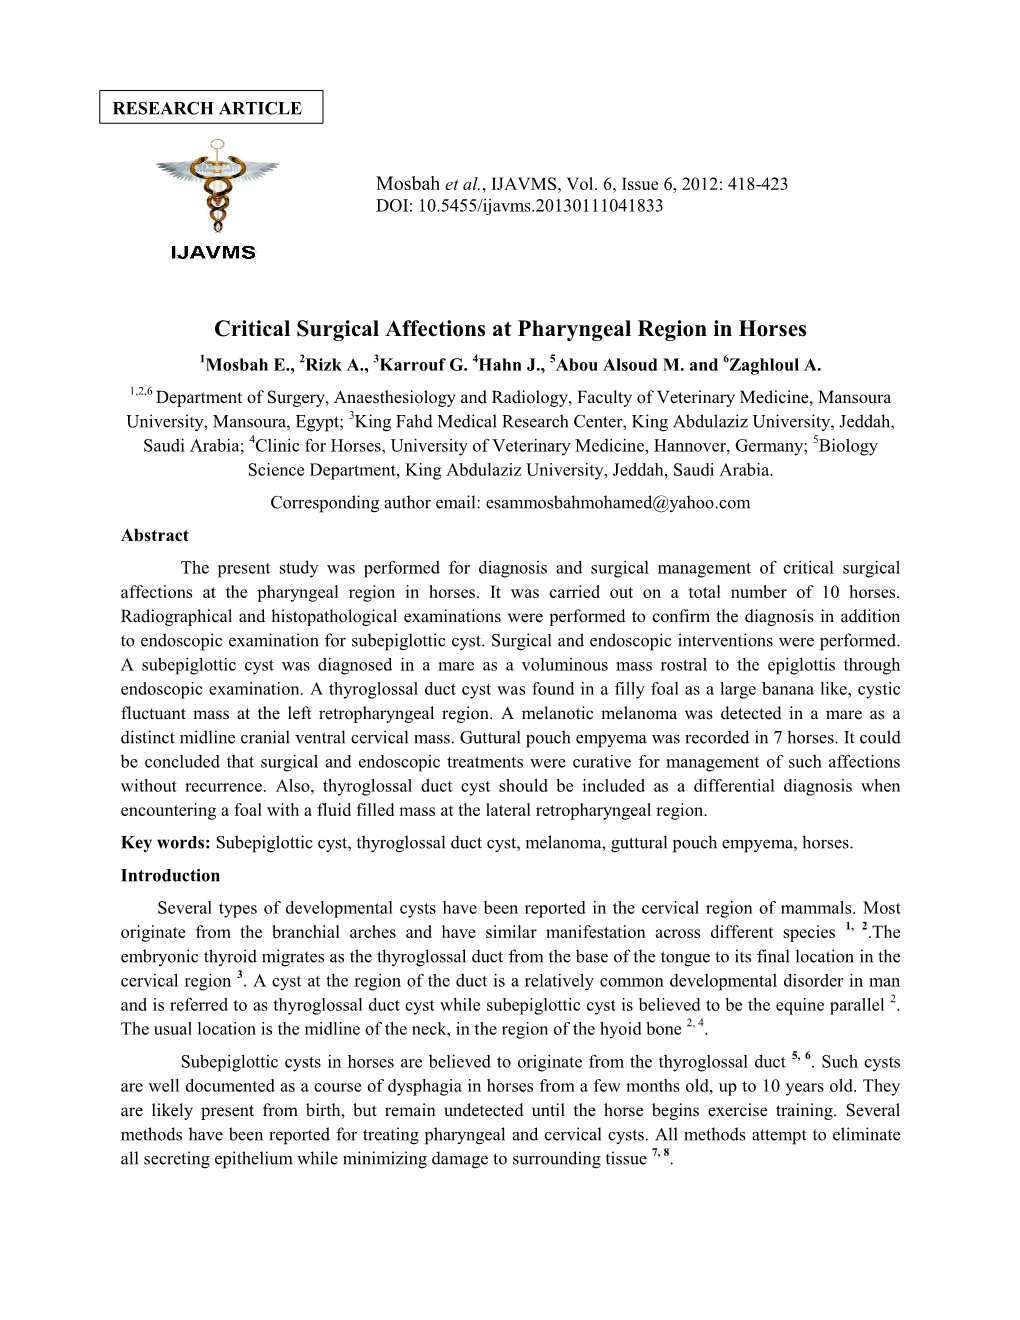 Critical Surgical Affections at Pharyngeal Region in Horses 1Mosbah E., 2Rizk A., 3Karrouf G